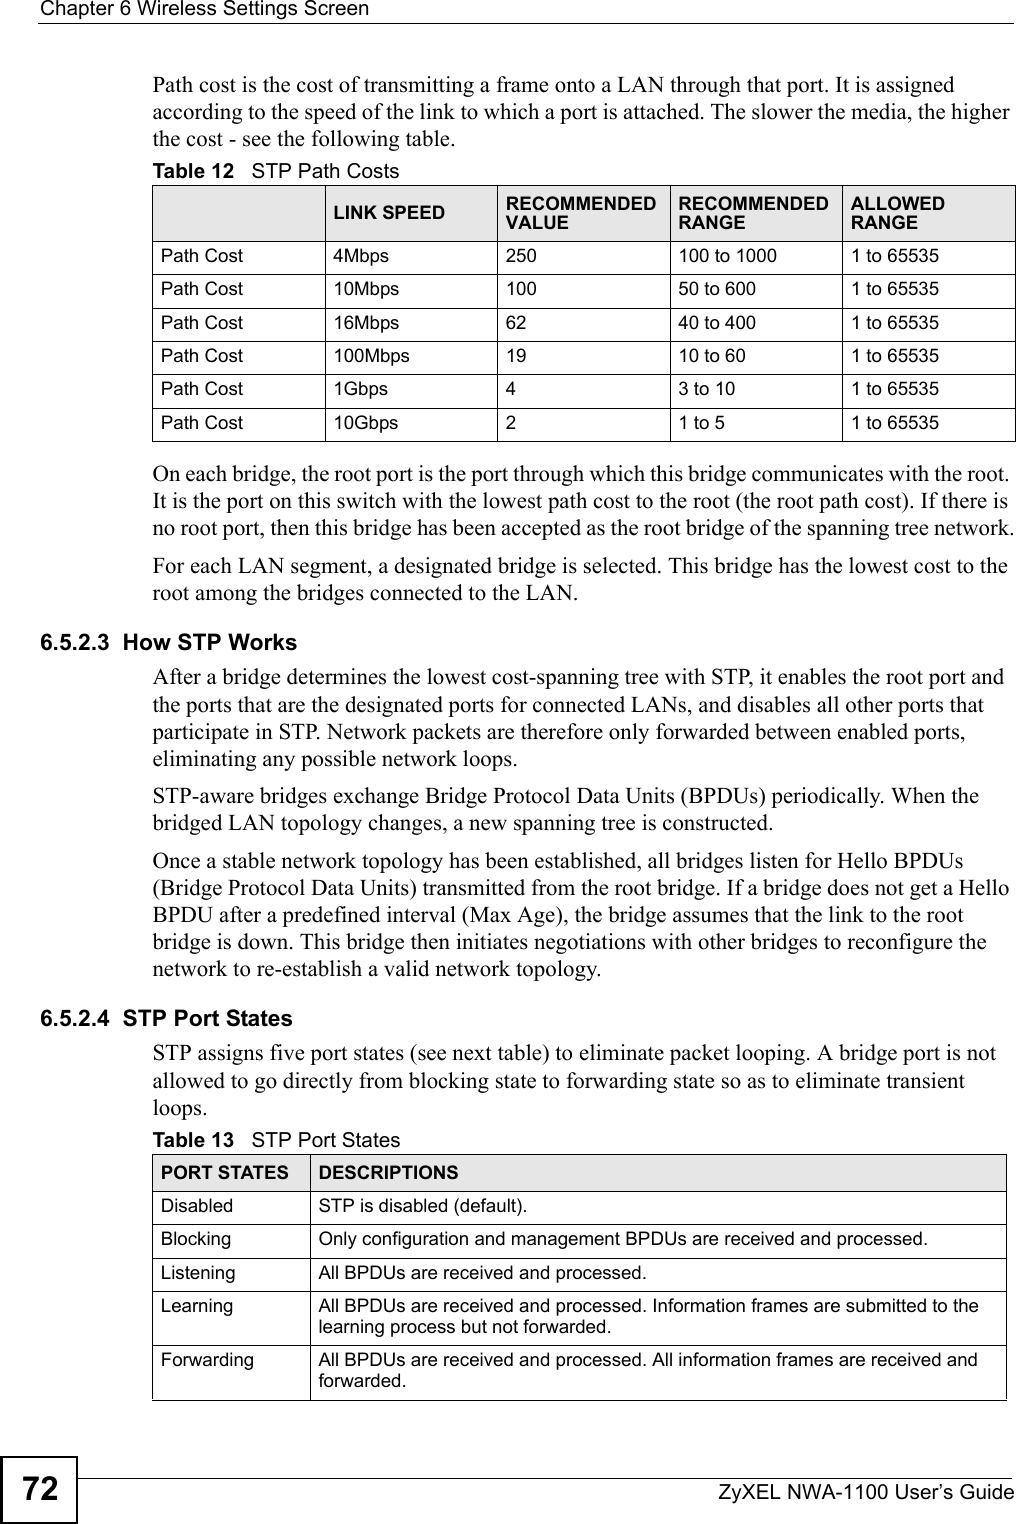 Chapter 6 Wireless Settings ScreenZyXEL NWA-1100 User’s Guide72Path cost is the cost of transmitting a frame onto a LAN through that port. It is assigned according to the speed of the link to which a port is attached. The slower the media, the higher the cost - see the following table.On each bridge, the root port is the port through which this bridge communicates with the root. It is the port on this switch with the lowest path cost to the root (the root path cost). If there is no root port, then this bridge has been accepted as the root bridge of the spanning tree network.For each LAN segment, a designated bridge is selected. This bridge has the lowest cost to the root among the bridges connected to the LAN. 6.5.2.3  How STP WorksAfter a bridge determines the lowest cost-spanning tree with STP, it enables the root port and the ports that are the designated ports for connected LANs, and disables all other ports that participate in STP. Network packets are therefore only forwarded between enabled ports, eliminating any possible network loops.STP-aware bridges exchange Bridge Protocol Data Units (BPDUs) periodically. When the bridged LAN topology changes, a new spanning tree is constructed.Once a stable network topology has been established, all bridges listen for Hello BPDUs (Bridge Protocol Data Units) transmitted from the root bridge. If a bridge does not get a Hello BPDU after a predefined interval (Max Age), the bridge assumes that the link to the root bridge is down. This bridge then initiates negotiations with other bridges to reconfigure the network to re-establish a valid network topology.6.5.2.4  STP Port StatesSTP assigns five port states (see next table) to eliminate packet looping. A bridge port is not allowed to go directly from blocking state to forwarding state so as to eliminate transient loops. Table 12   STP Path CostsLINK SPEED RECOMMENDED VALUERECOMMENDED RANGEALLOWED RANGEPath Cost 4Mbps 250 100 to 1000 1 to 65535Path Cost 10Mbps 100 50 to 600 1 to 65535Path Cost 16Mbps 62 40 to 400 1 to 65535Path Cost 100Mbps 19 10 to 60 1 to 65535Path Cost 1Gbps 43 to 10 1 to 65535Path Cost 10Gbps 21 to 5 1 to 65535Table 13   STP Port StatesPORT STATES DESCRIPTIONSDisabled STP is disabled (default).Blocking Only configuration and management BPDUs are received and processed.Listening All BPDUs are received and processed.Learning All BPDUs are received and processed. Information frames are submitted to the learning process but not forwarded.Forwarding All BPDUs are received and processed. All information frames are received and forwarded.